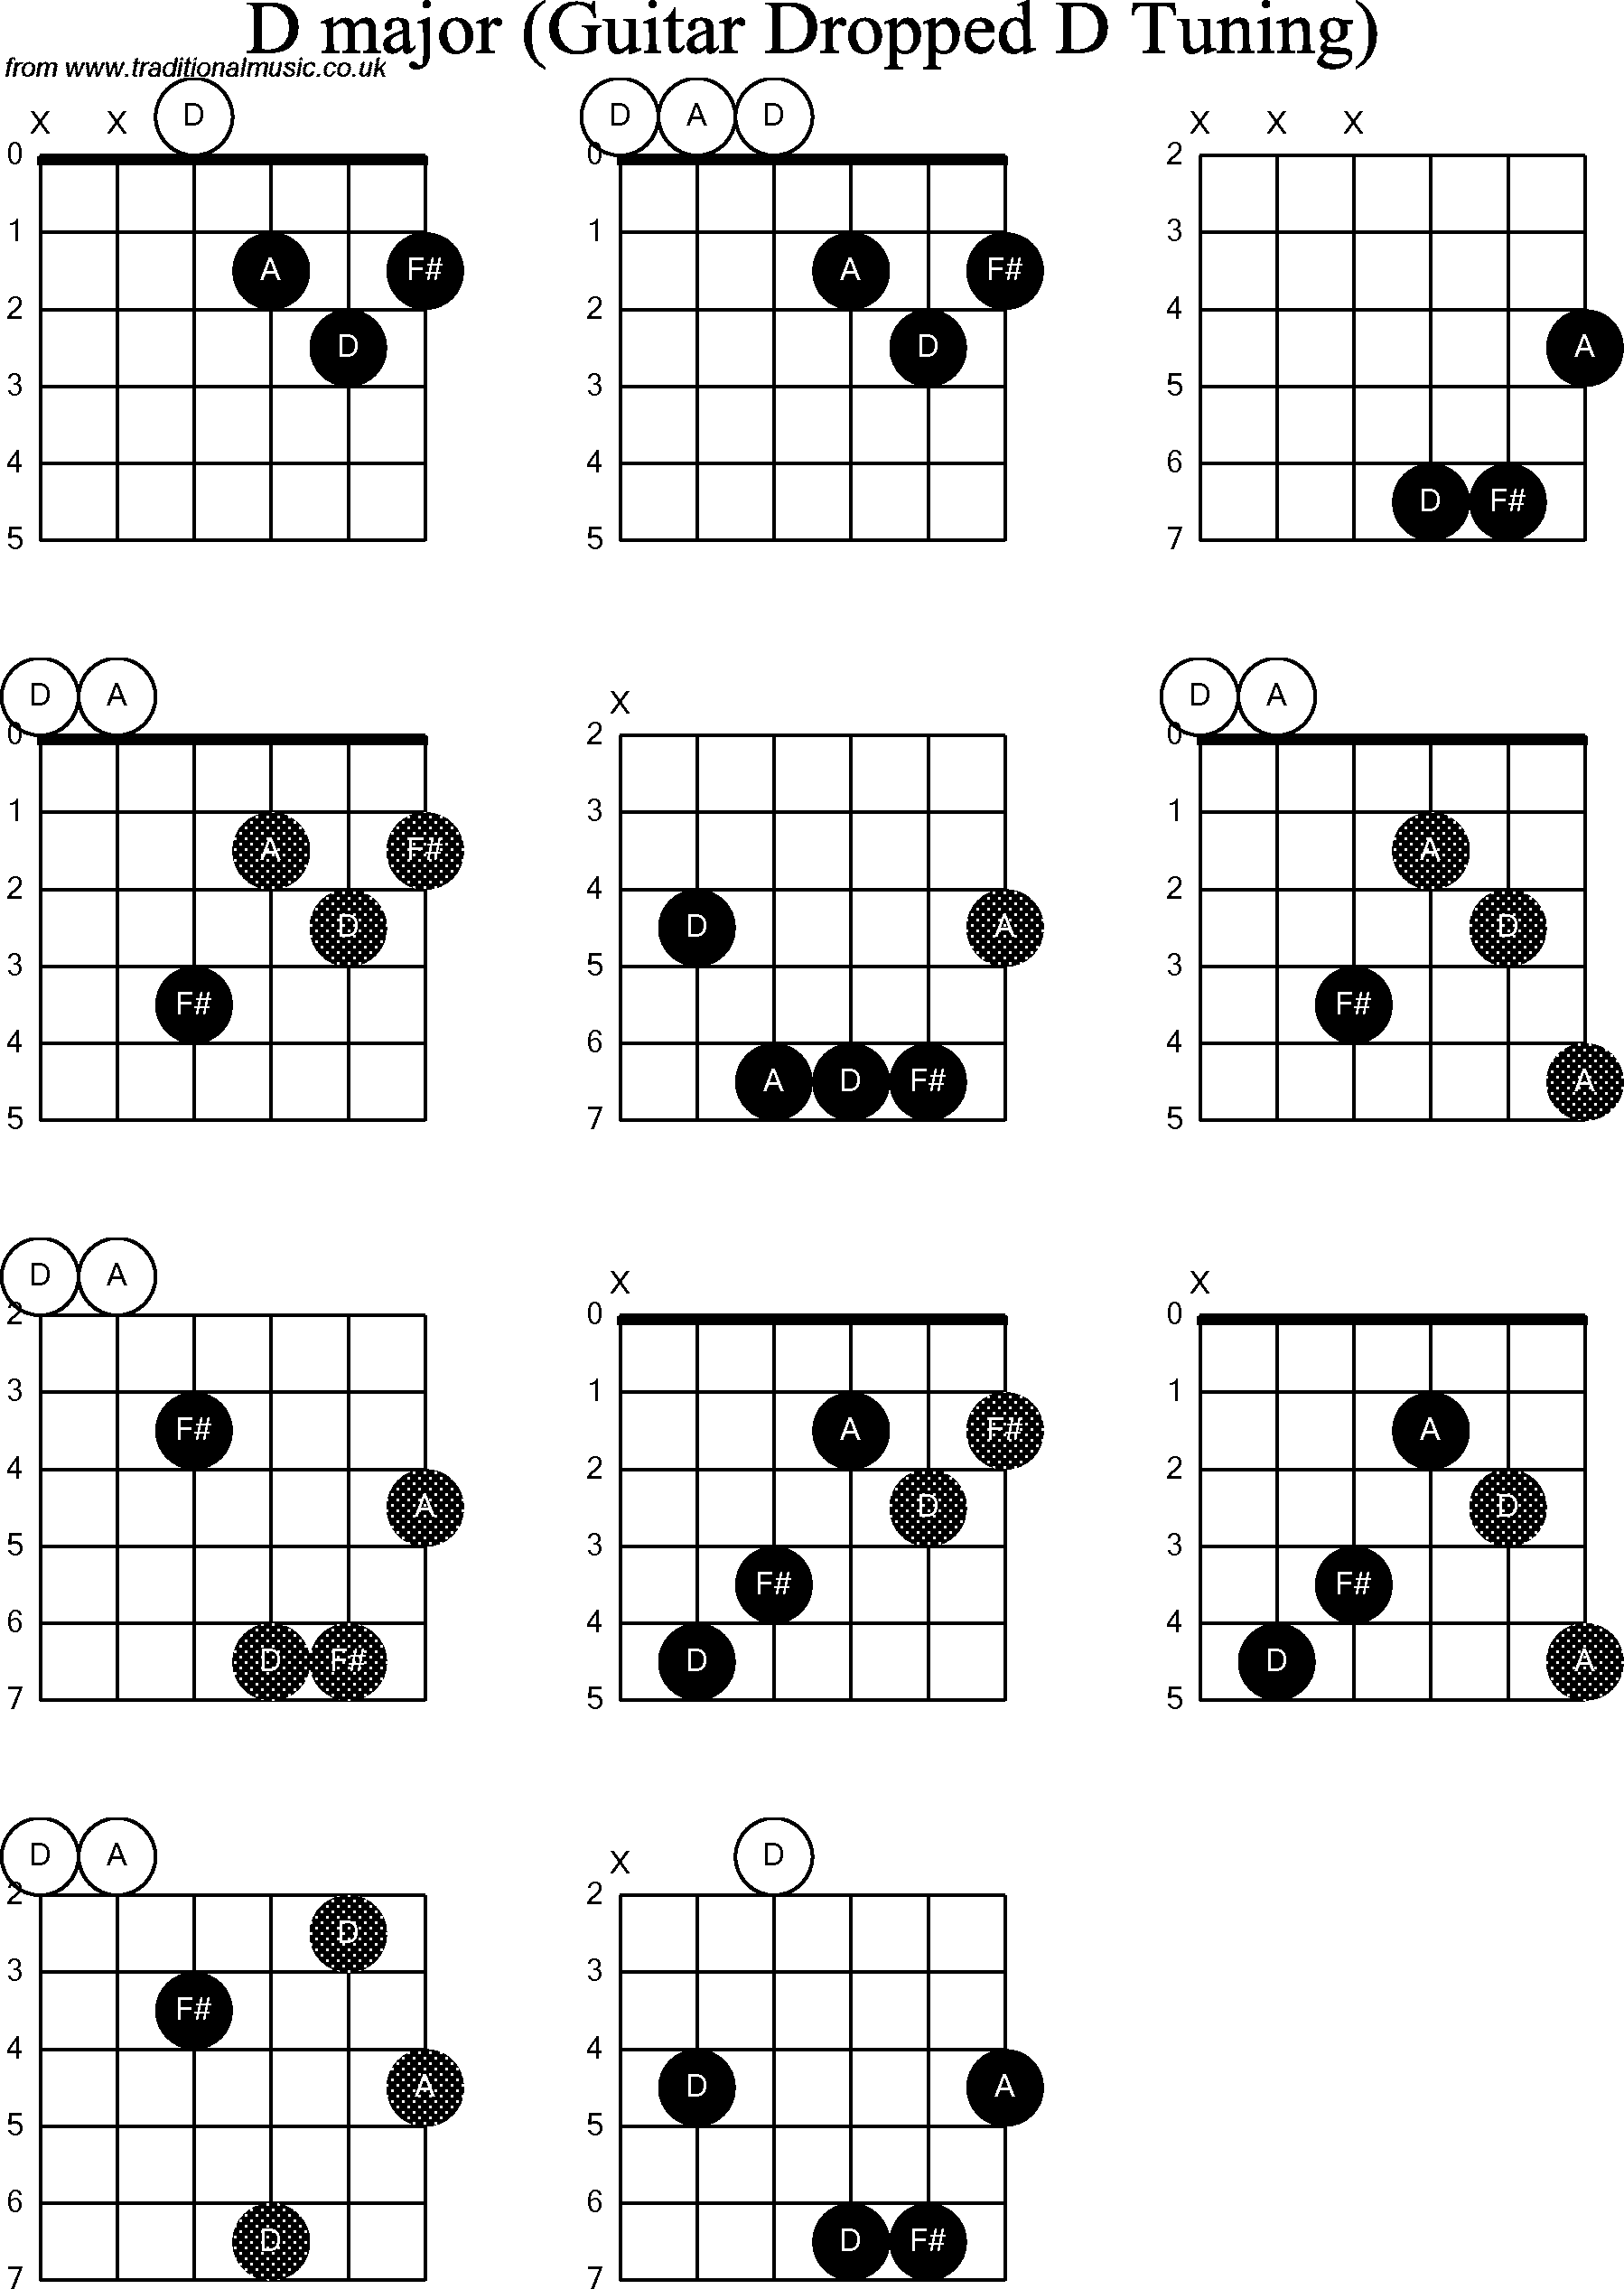 Chord diagrams for dropped D Guitar(DADGBE), D